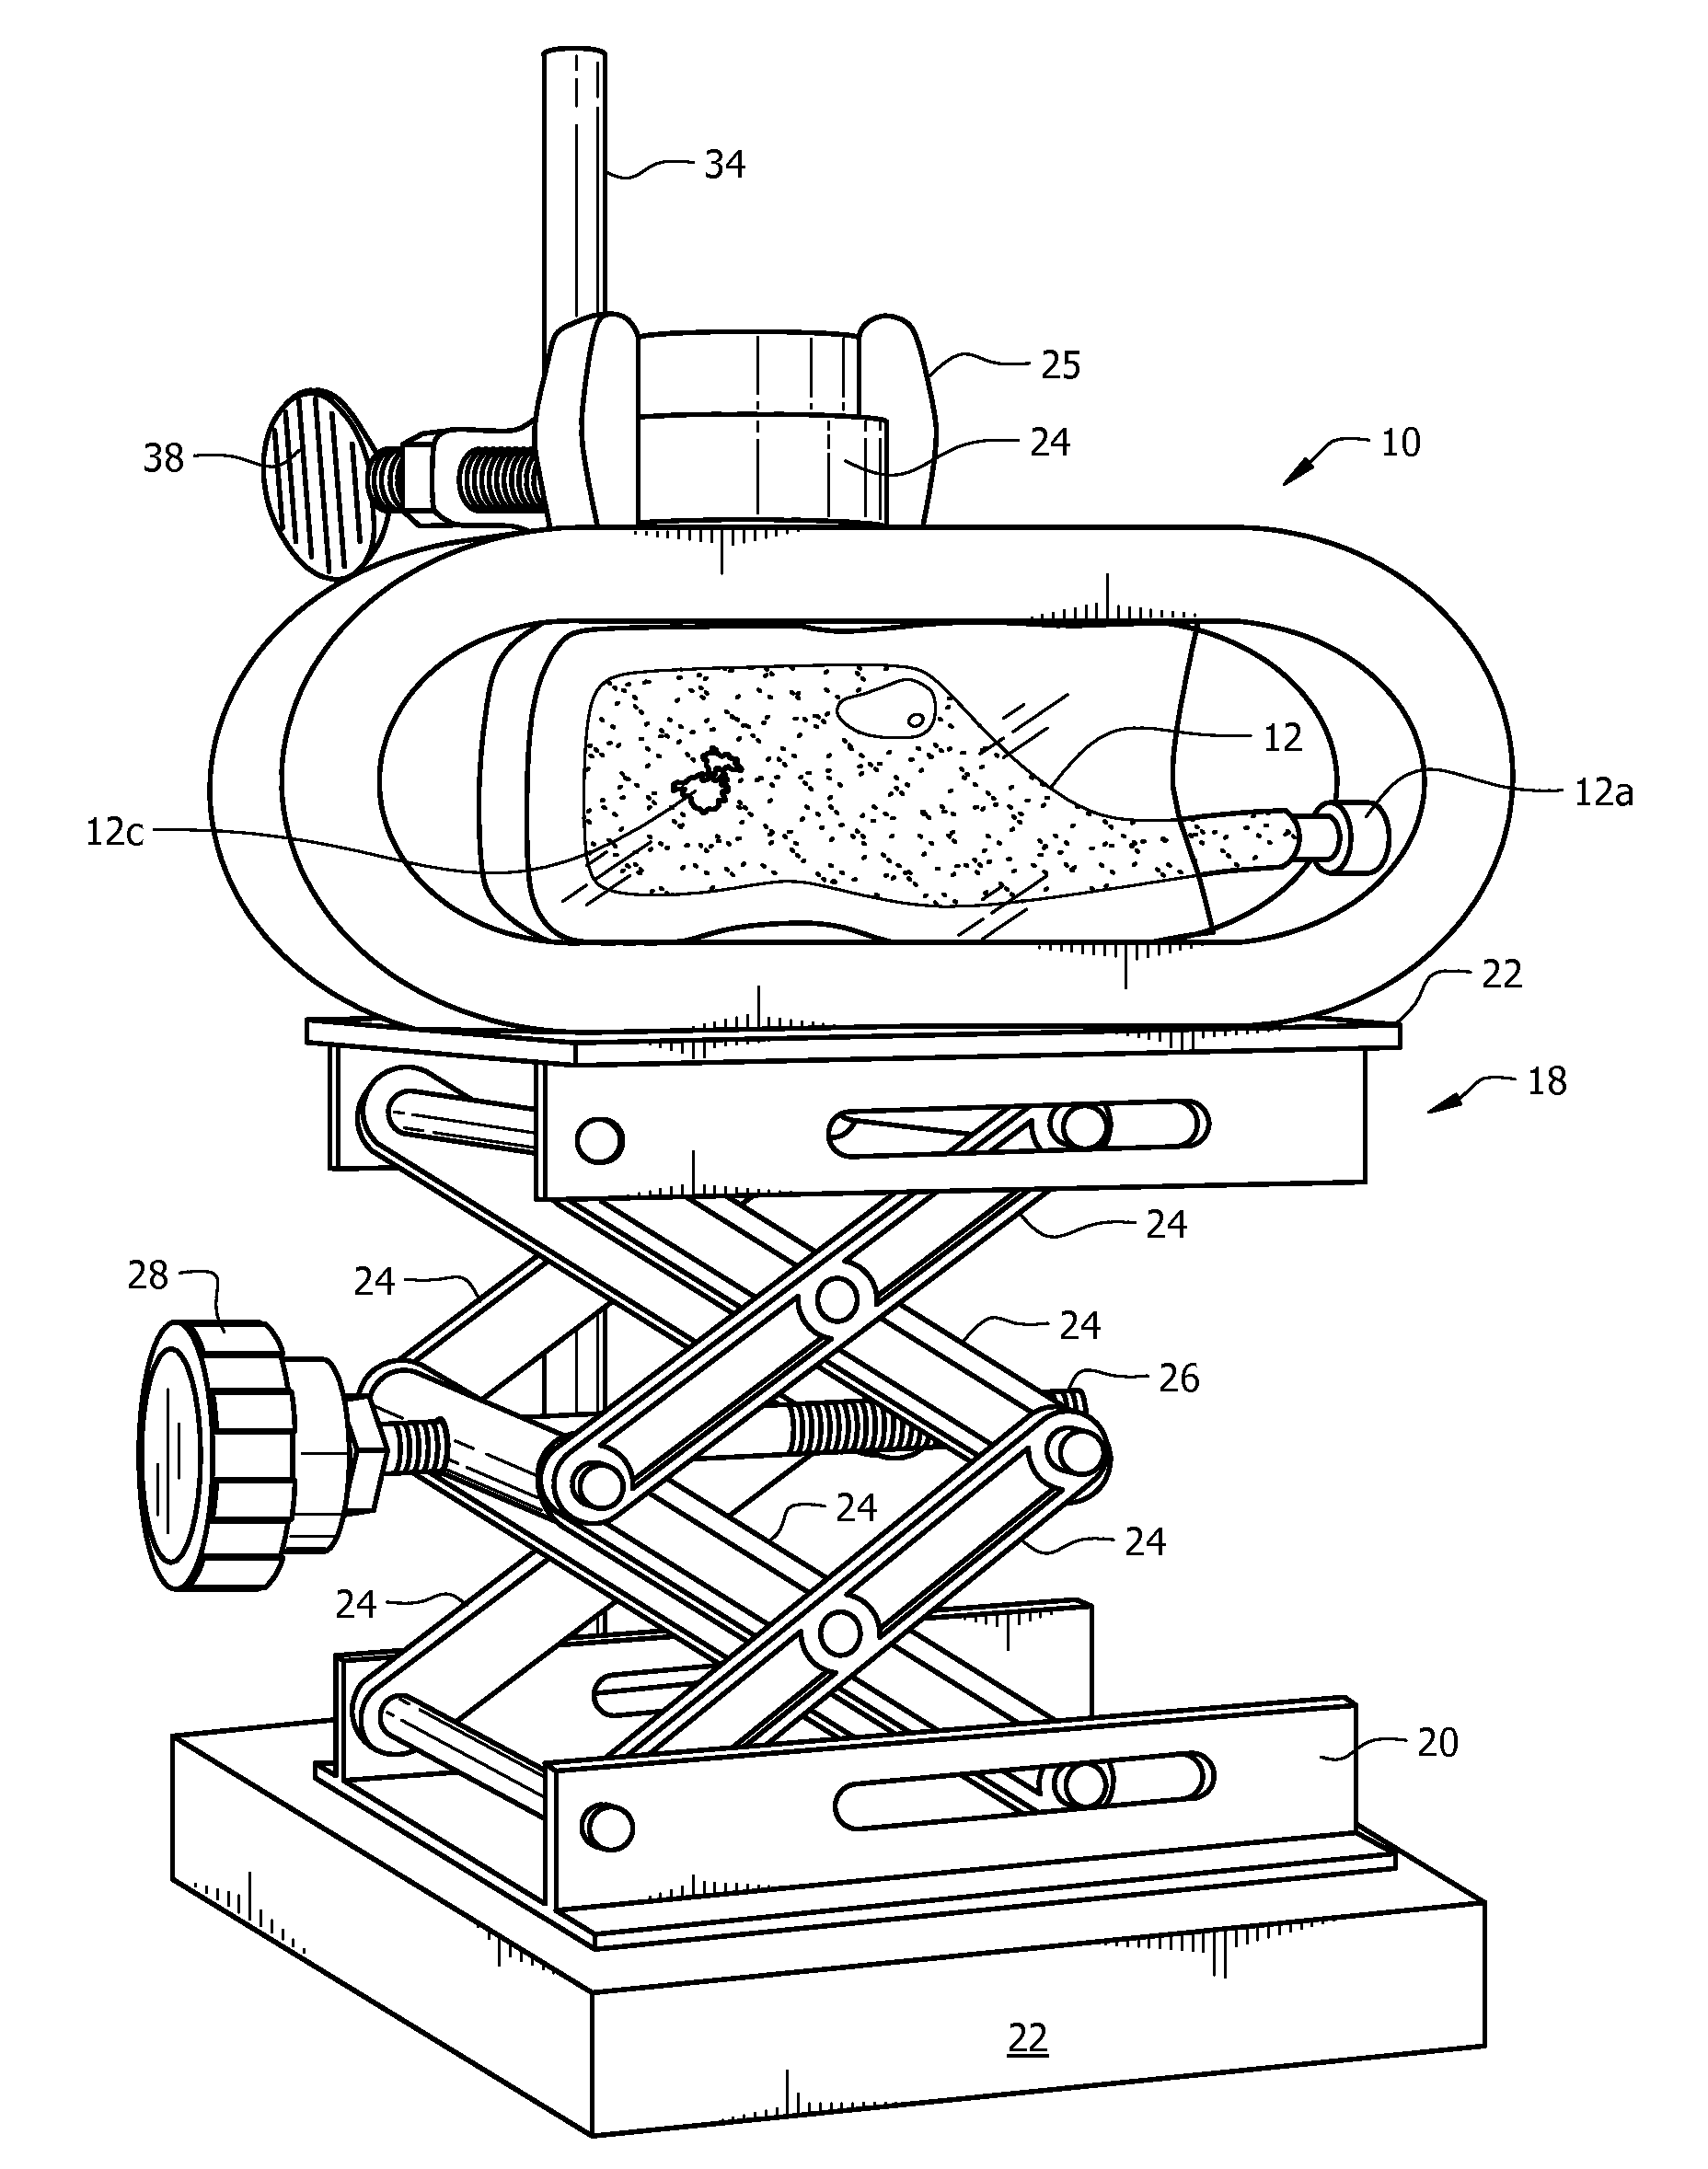 Magnetic three-dimensional cell culture apparatus and method